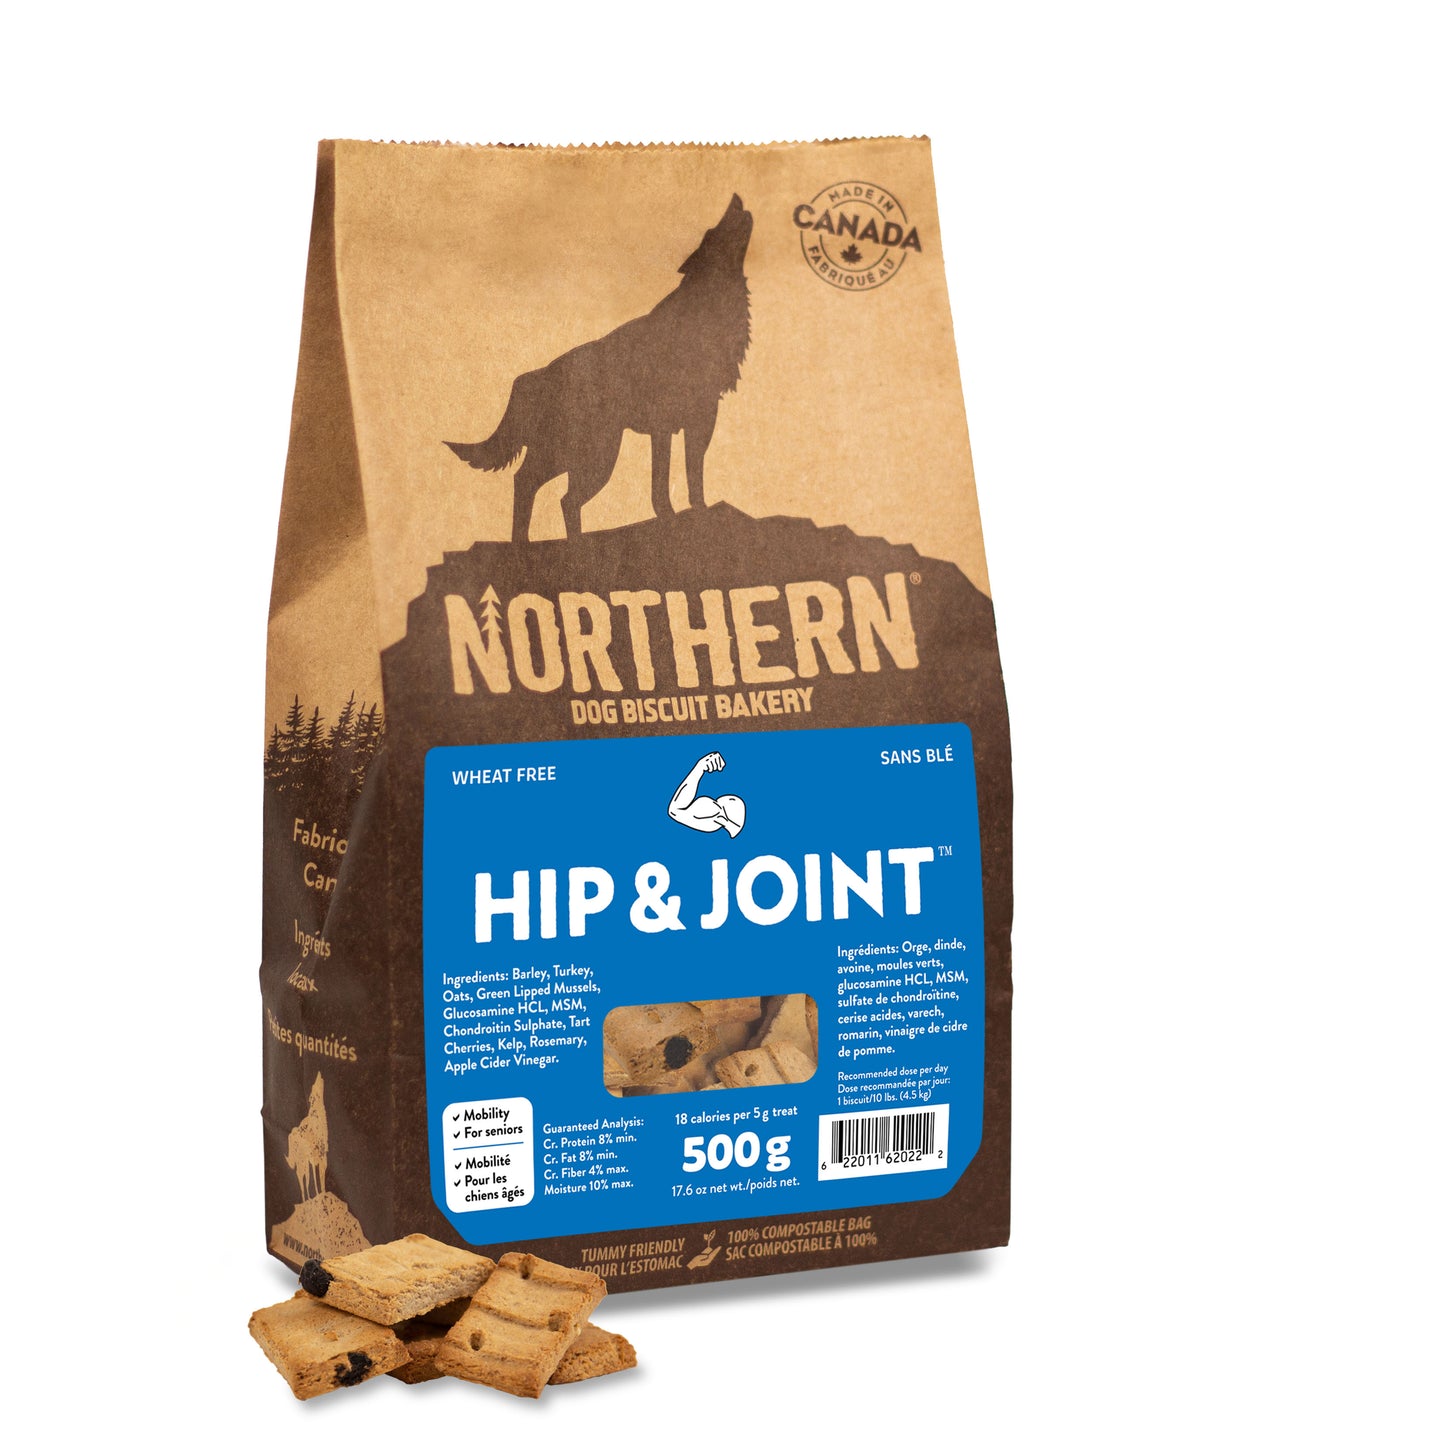 Hip & Joint Biscuits